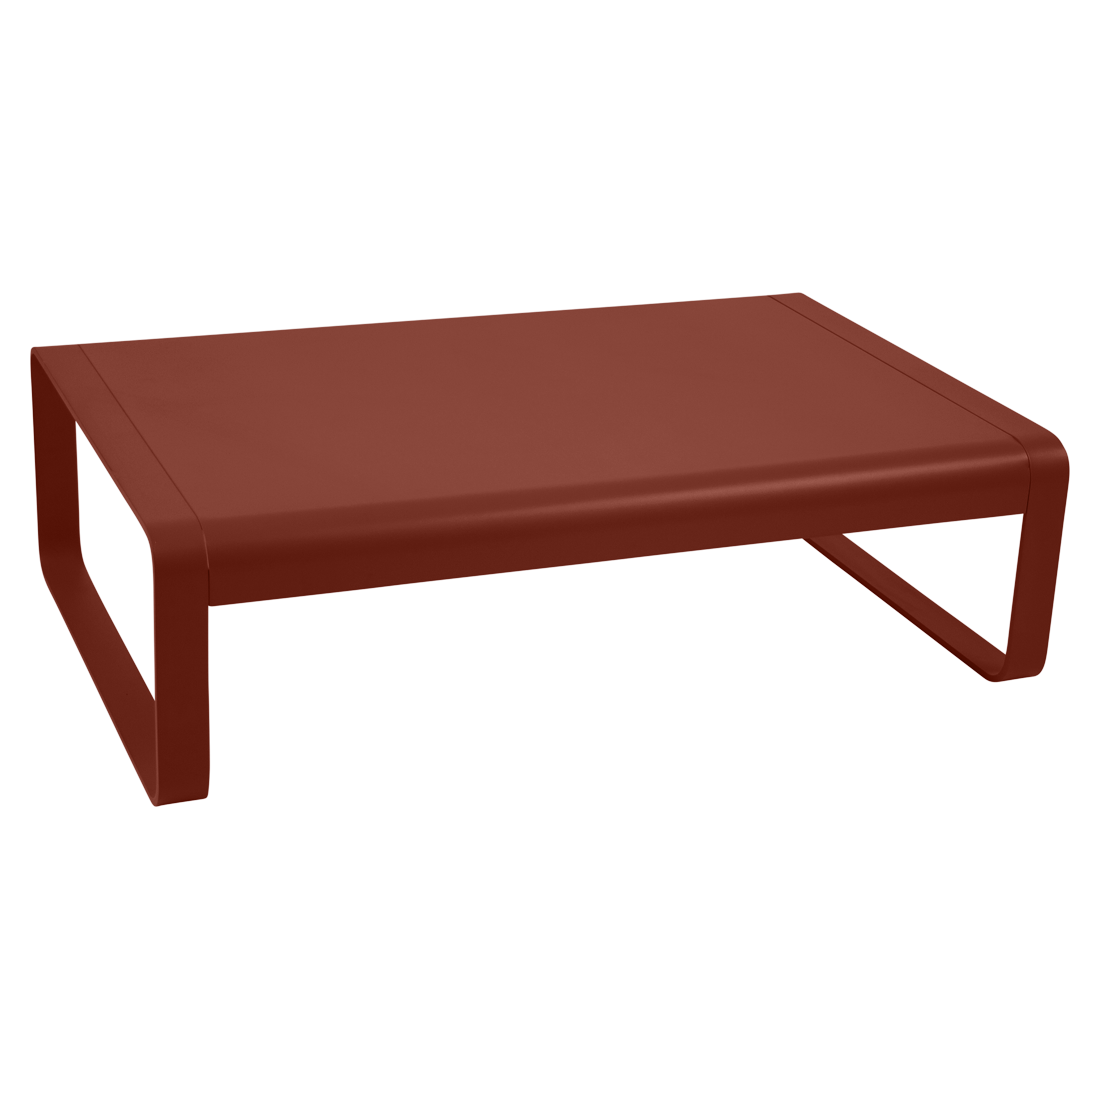 Table basse bellevie ocre rouge